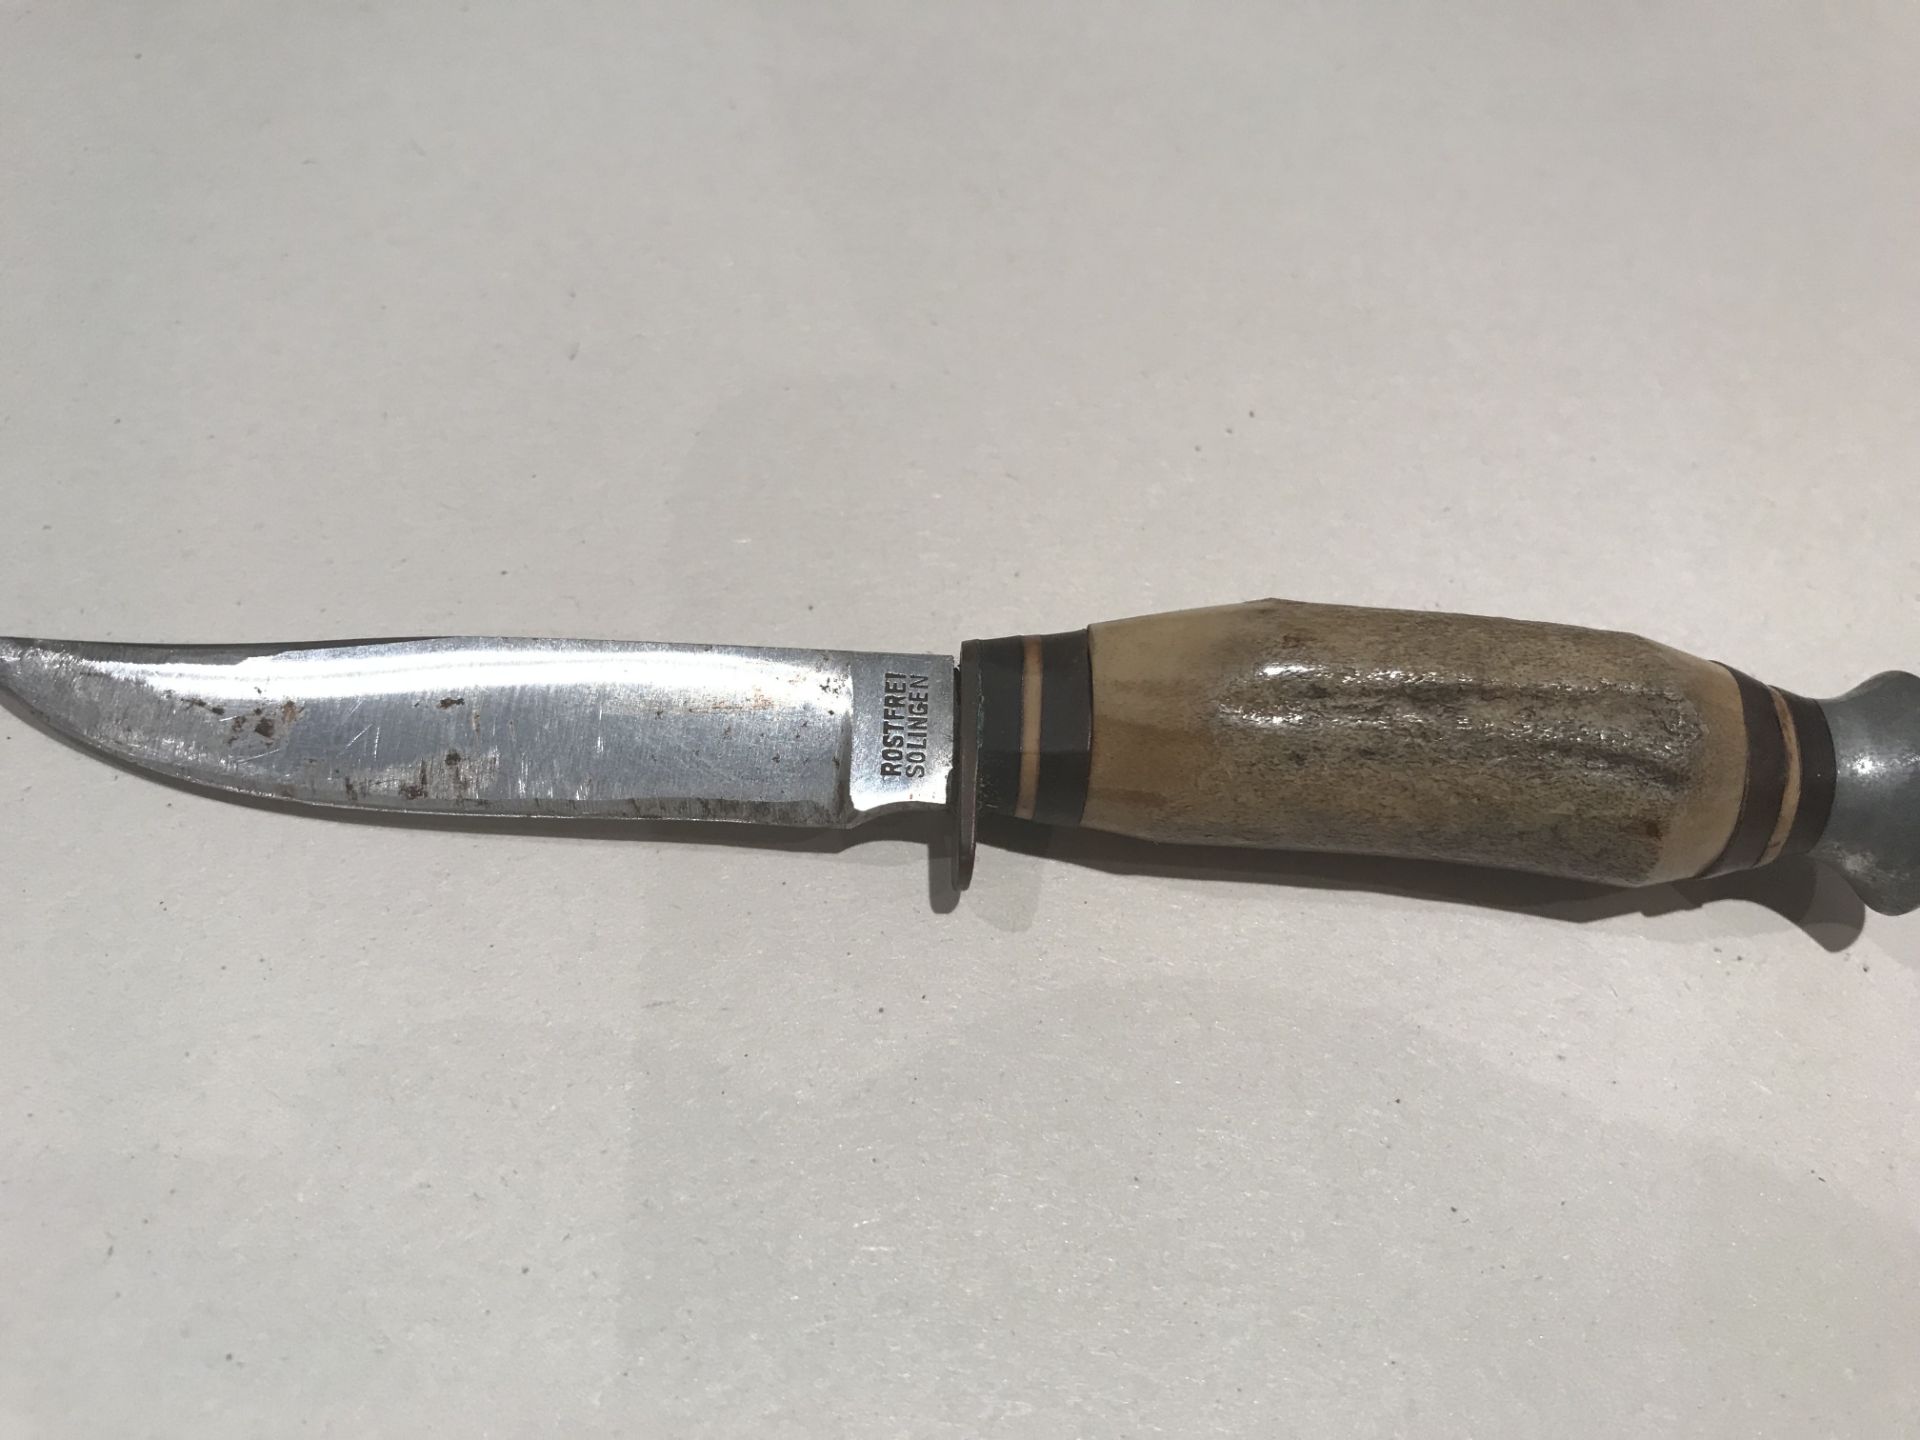 Rostfrei solingen small hunting knife - Image 2 of 2